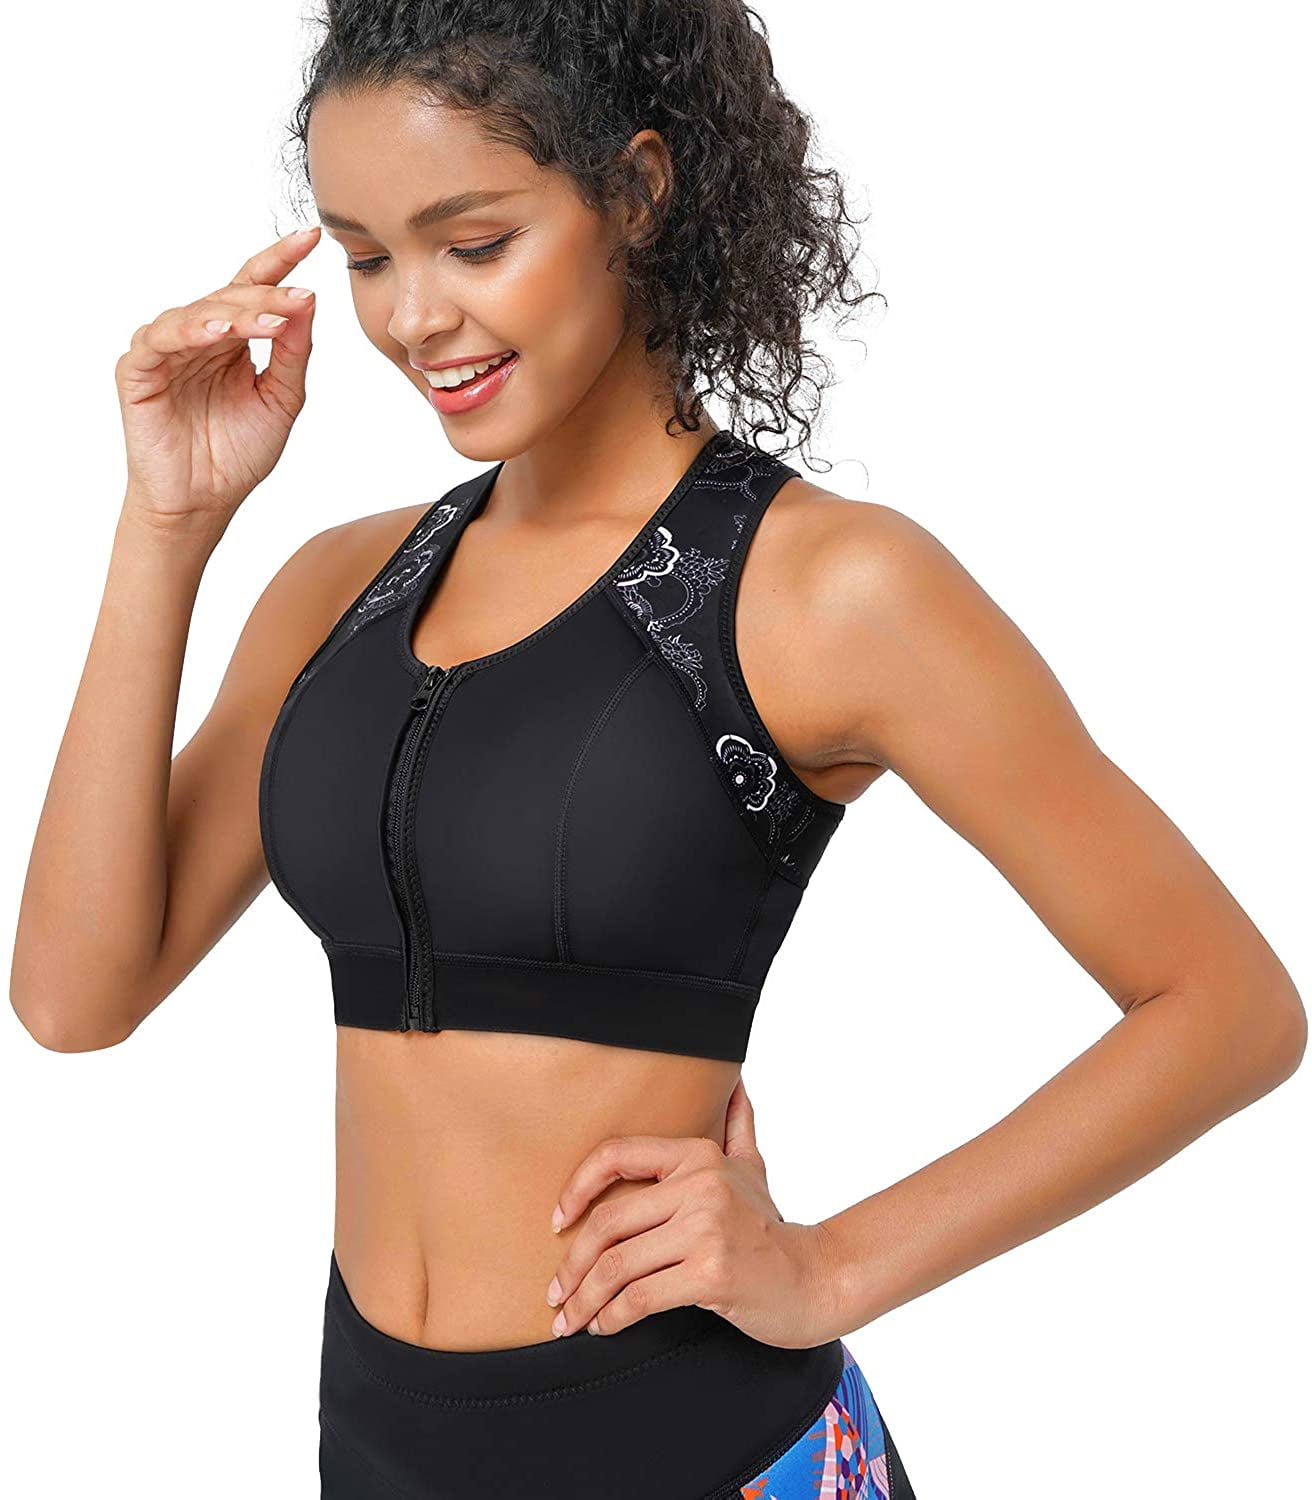 Details about   Women Front Zip Up Sports Bra High Impact Seamless Fitness Yoga Padded Vests Top 